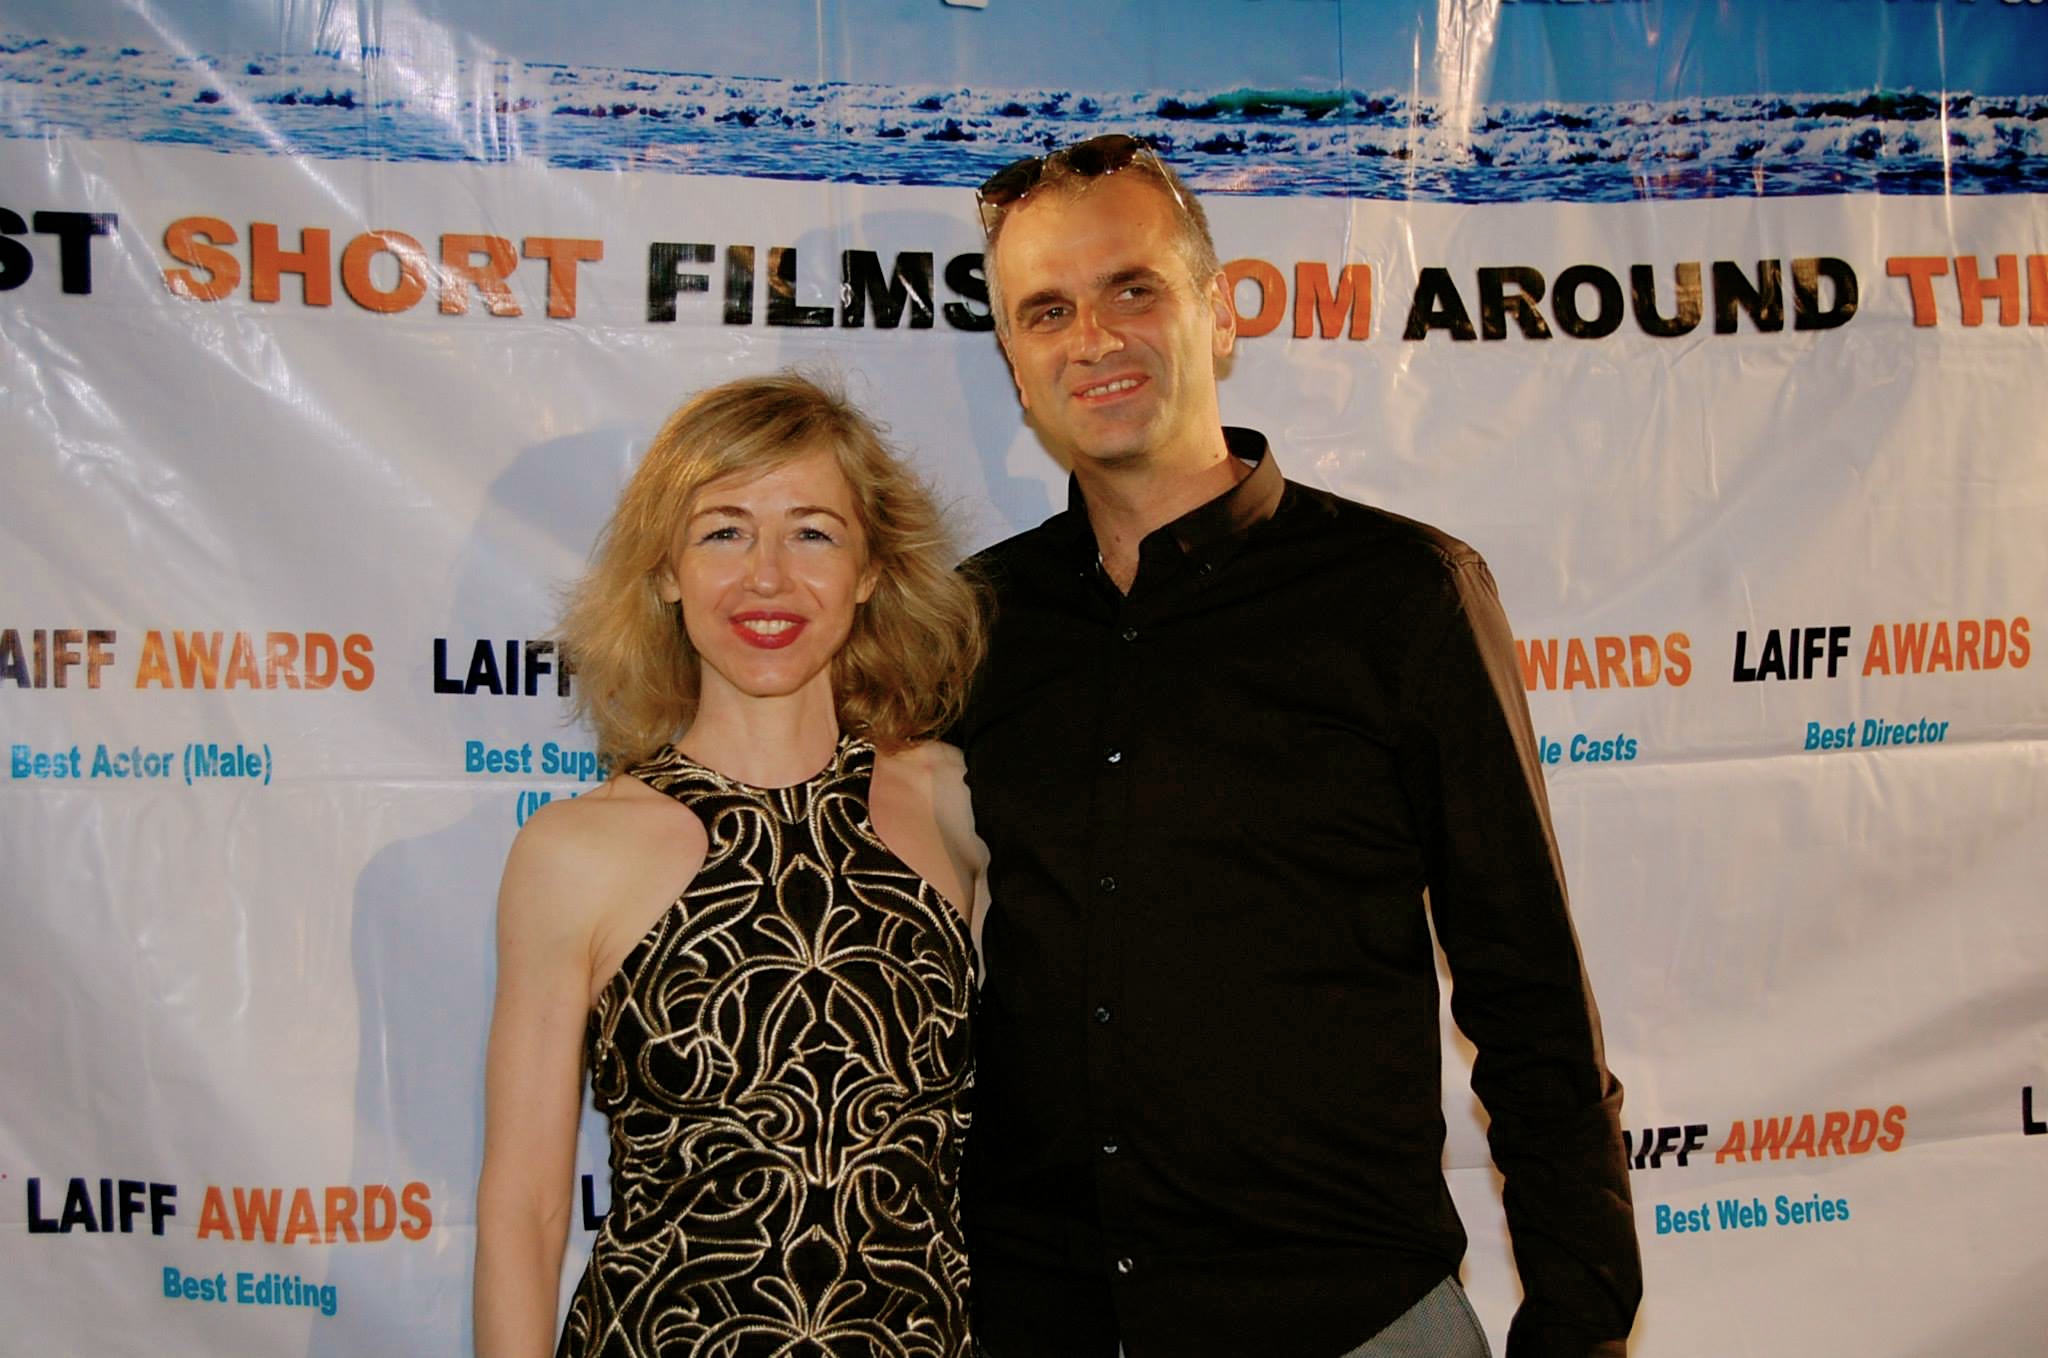 with Adrian Roman at the Los Angeles Independent Film Festival Awards